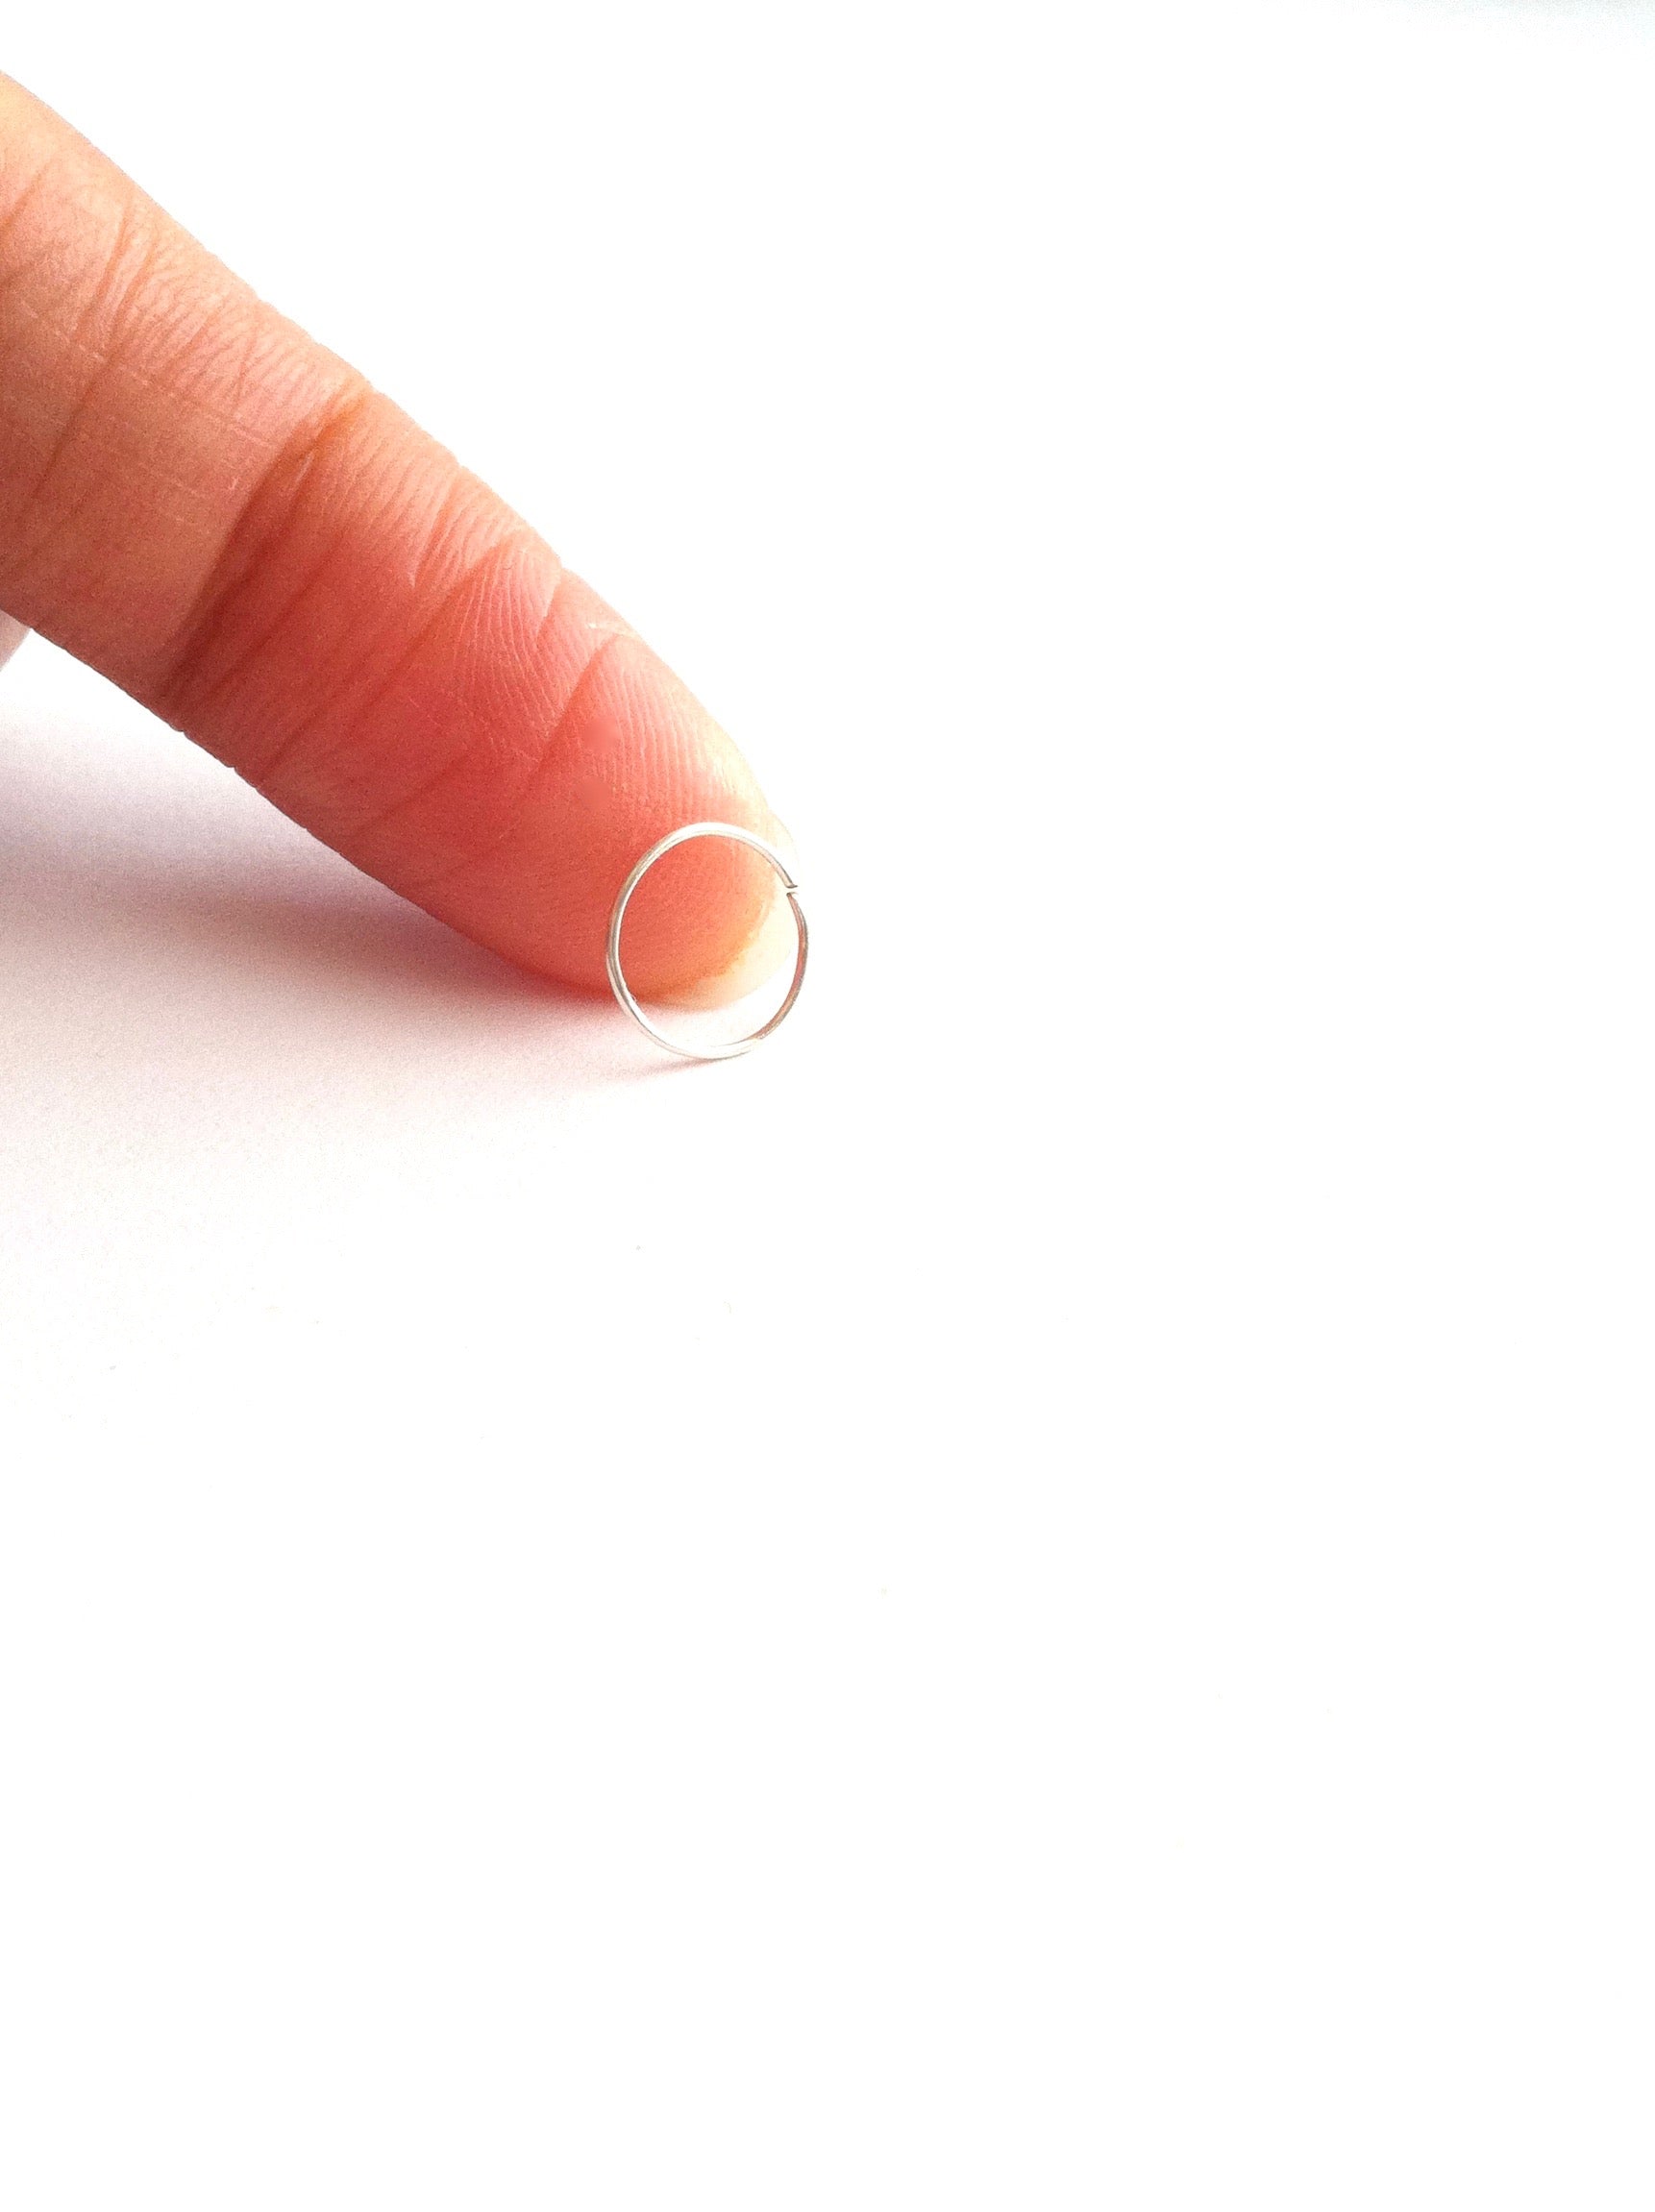 Small Nose Stud | Nose jewelry, Nose ring jewelry, Nose piercing jewelry